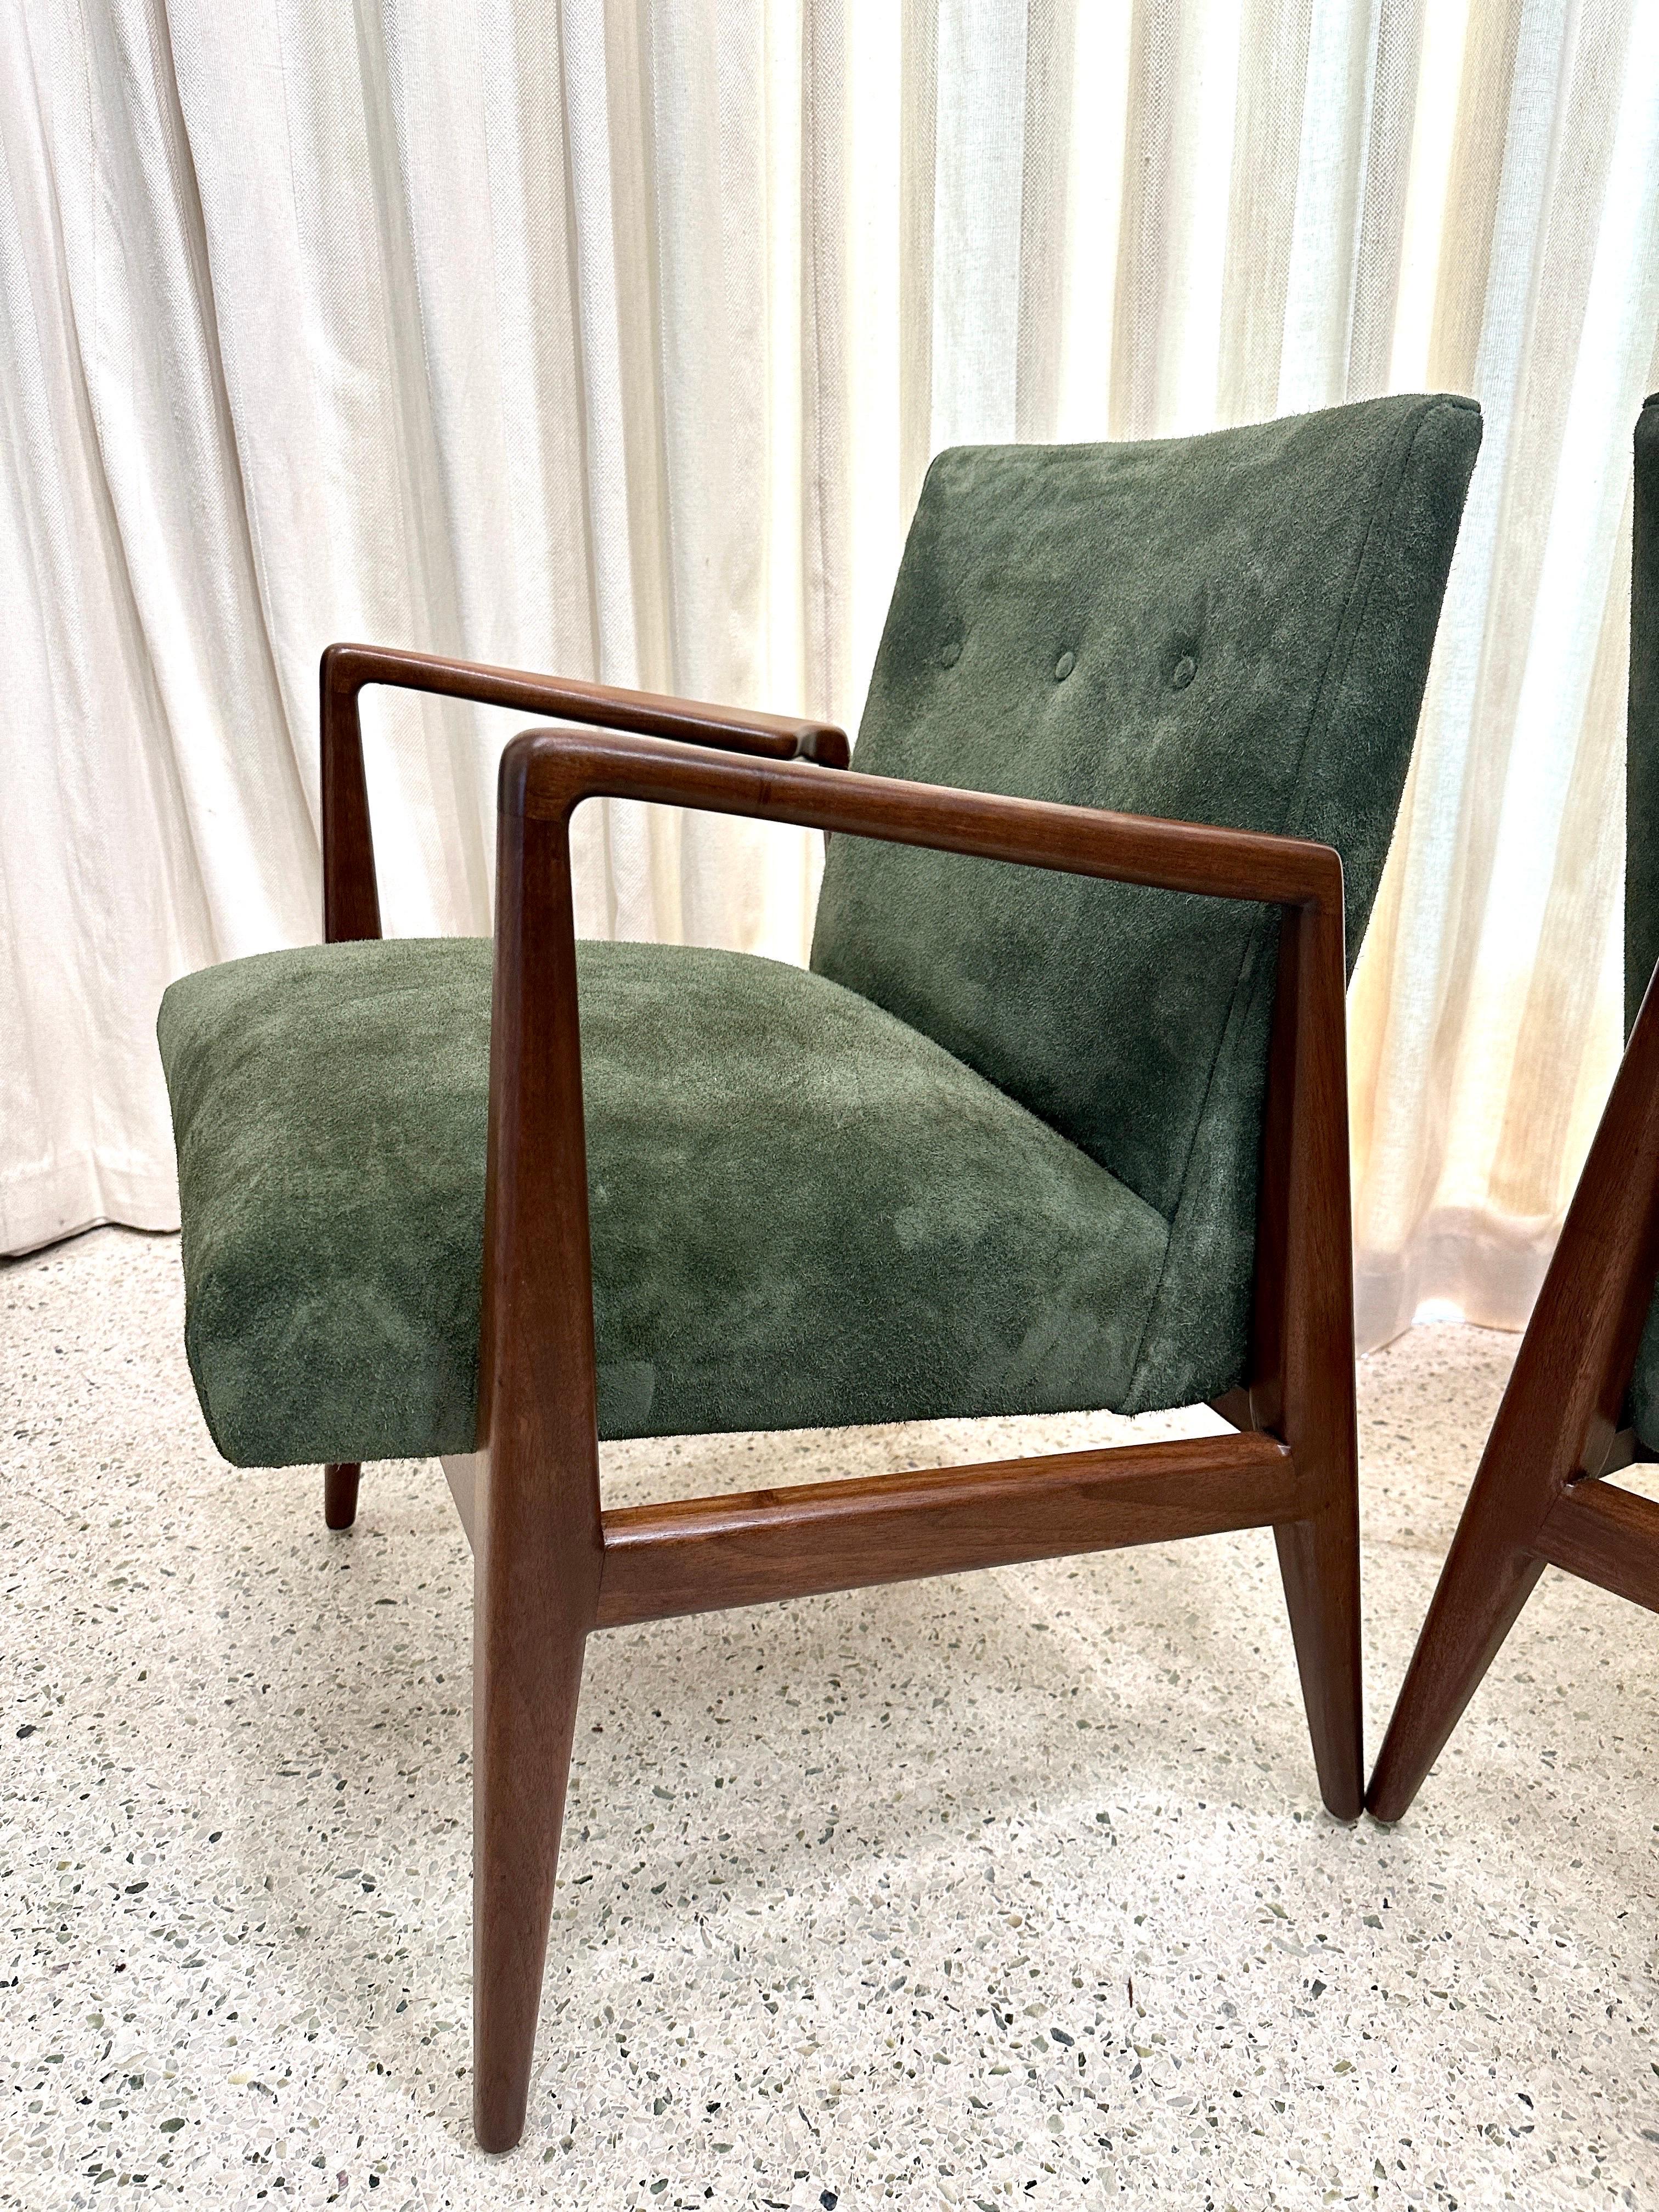 Original Vintage Jens Risom Armchairs in Green Suede w/ Label, PAIR For Sale 3